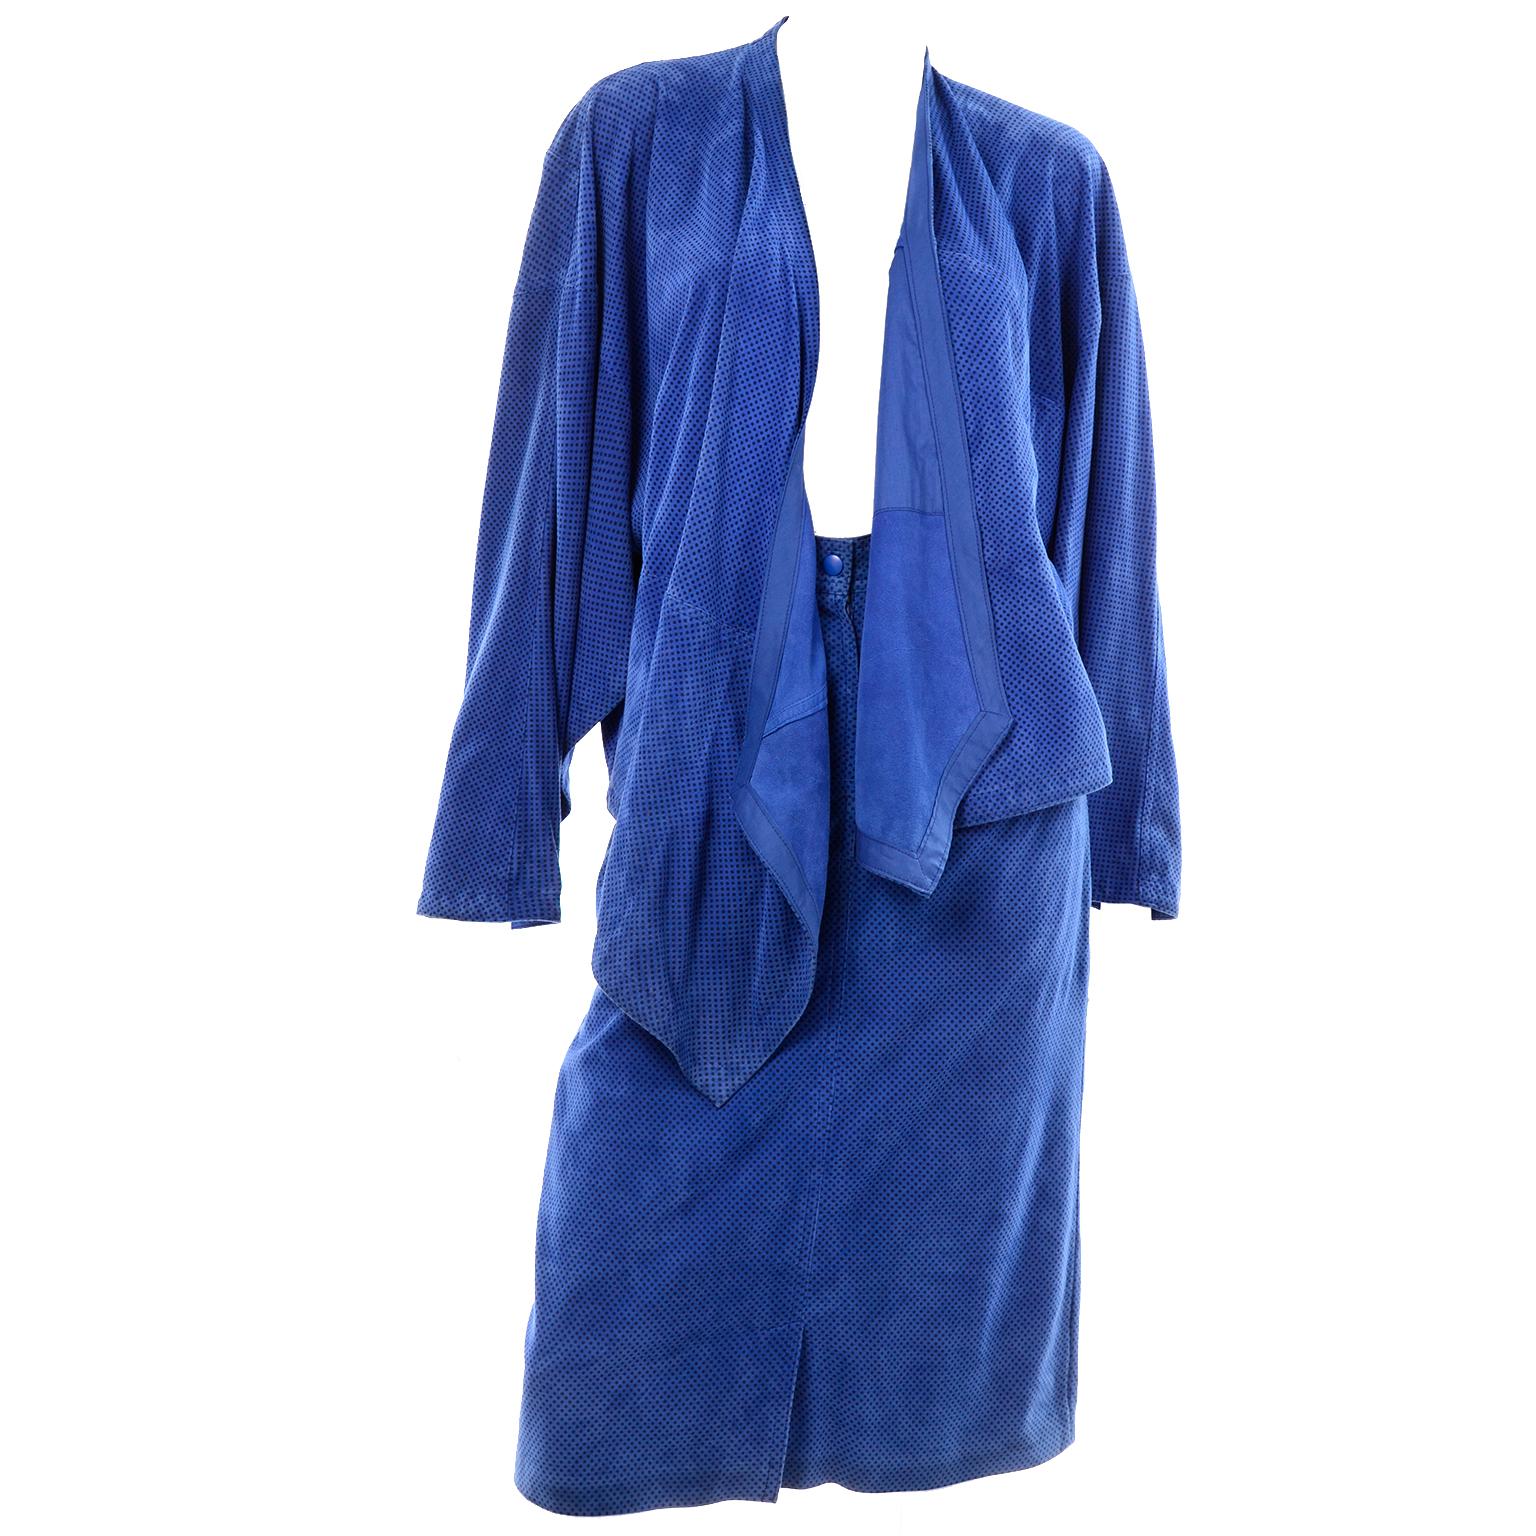 This is a stunning two piece ensemble designed by Margaretha Ley for Escada in the 1980's. The suit is made of blue suede with small black polka dots and includes a skirt and an open front wrap jacket w/ pockets. The original owner wore the outfit